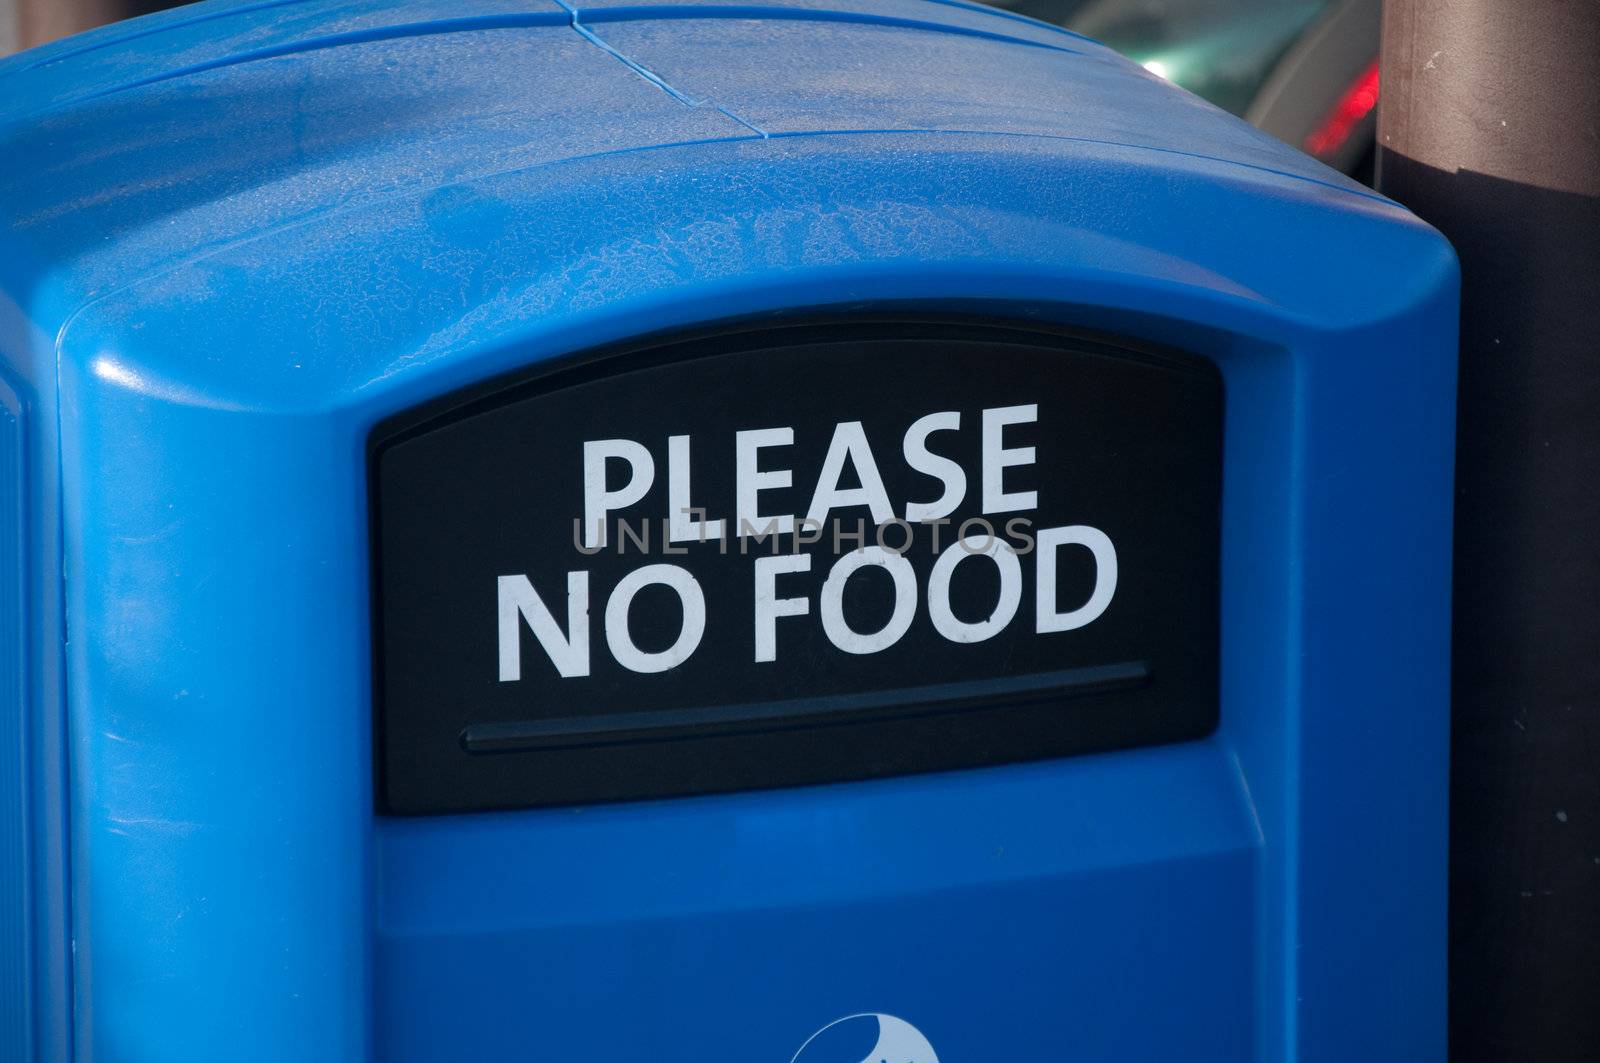 Blue recycle bin with no food sign